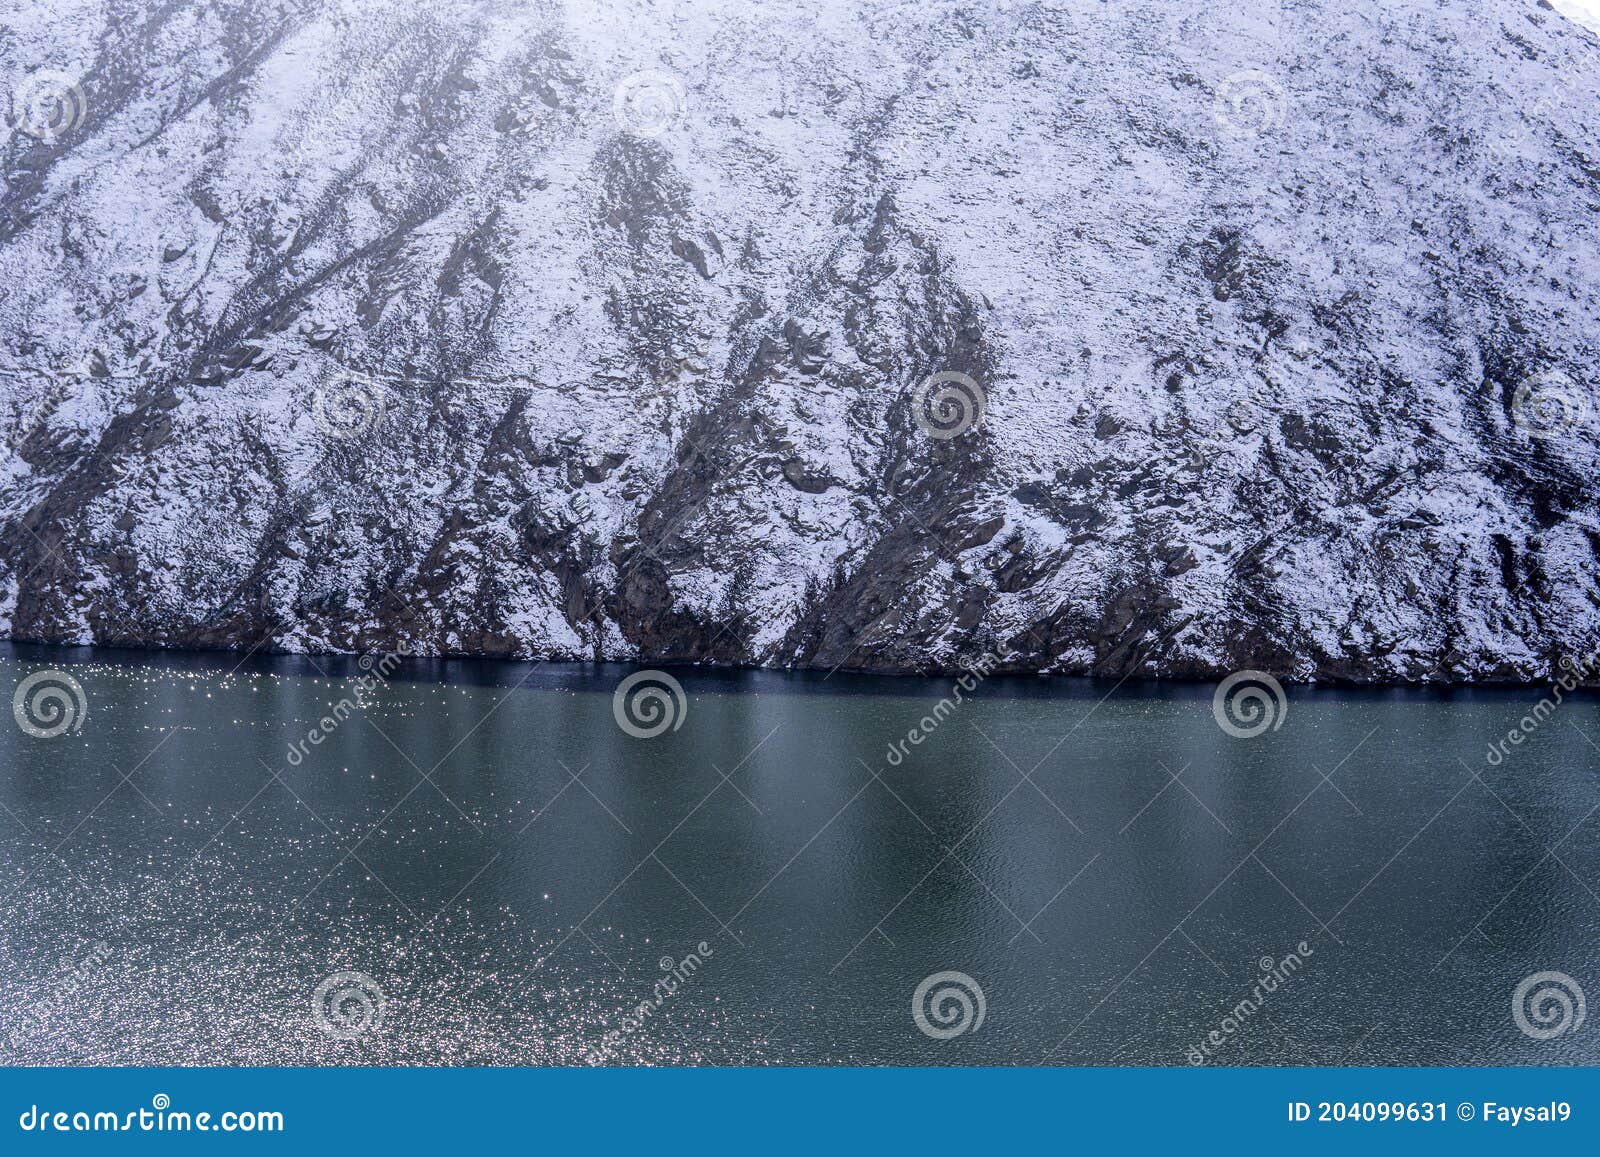 snow capped mountain and lake